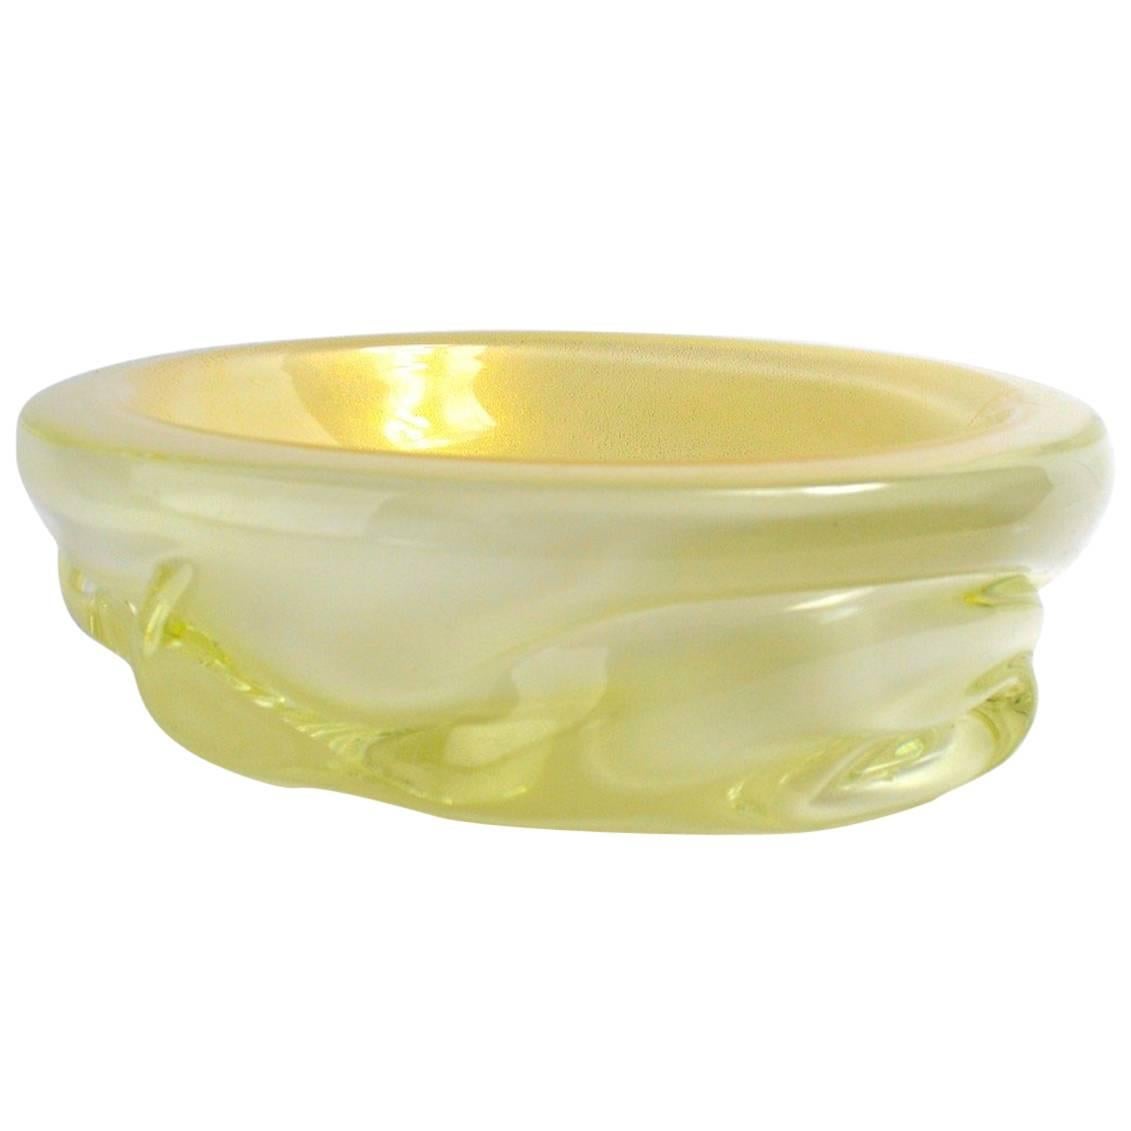 Murano Glass Bowl with Gold Fleck Inclusions Attributed to Seguso